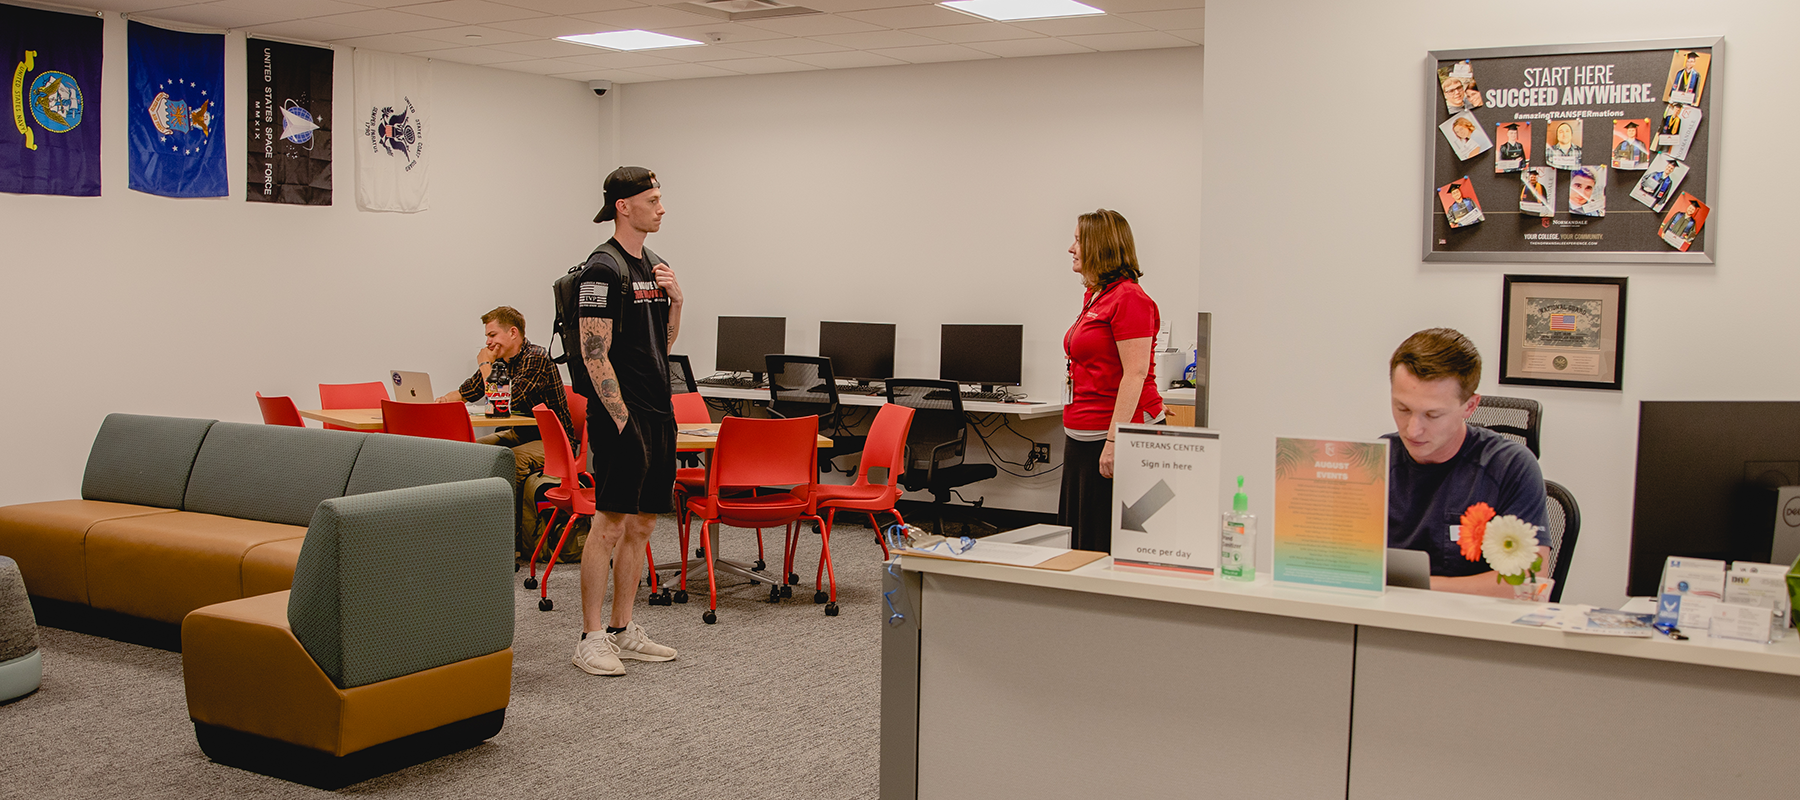 Students and staff in the Veteran's Resource Center.